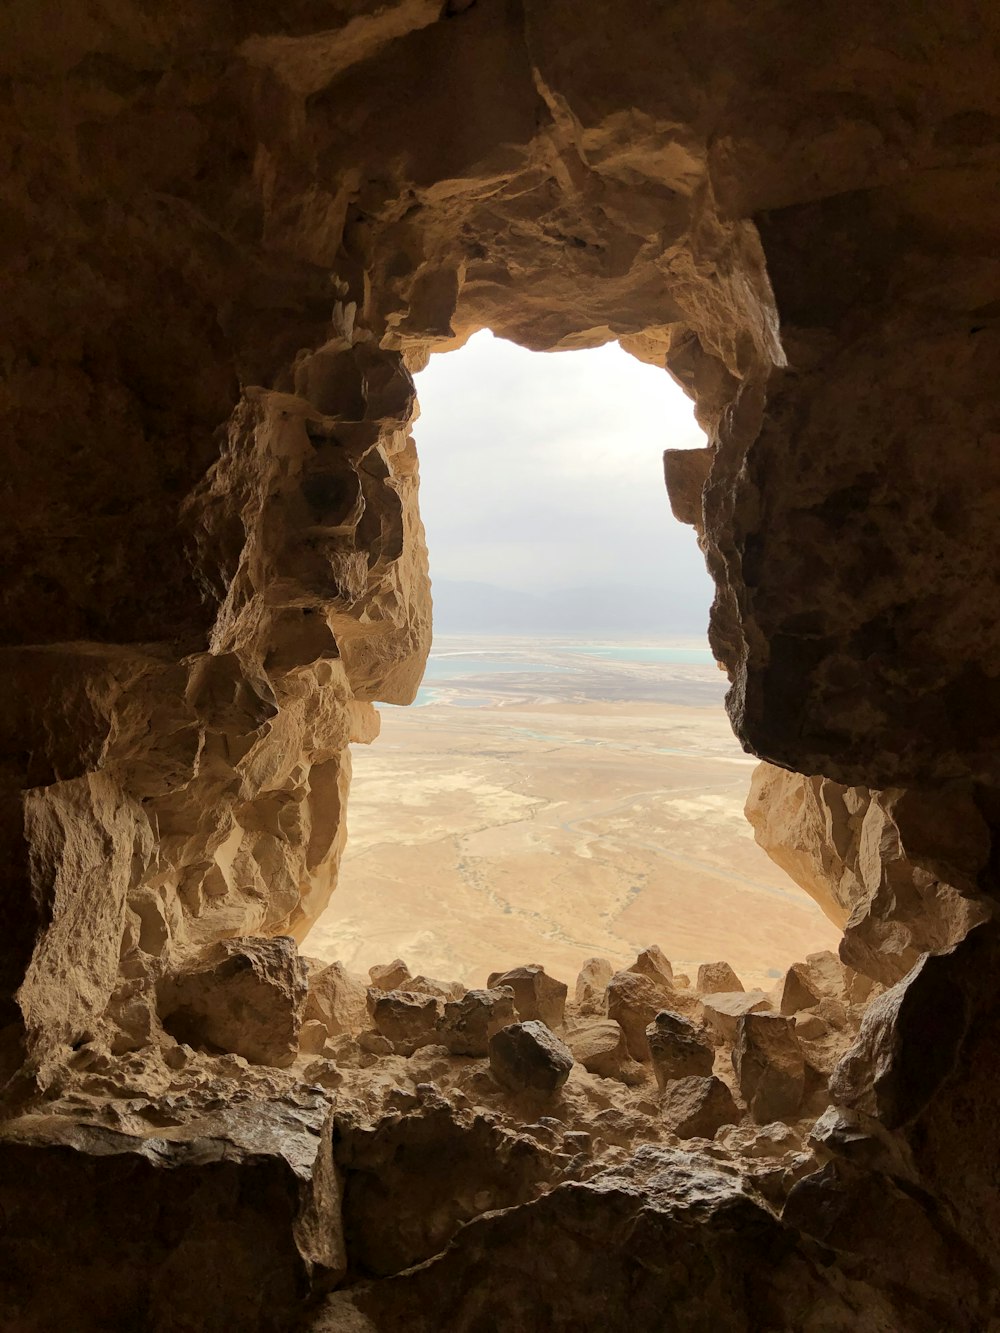 a view of the desert through a hole in a rock wall